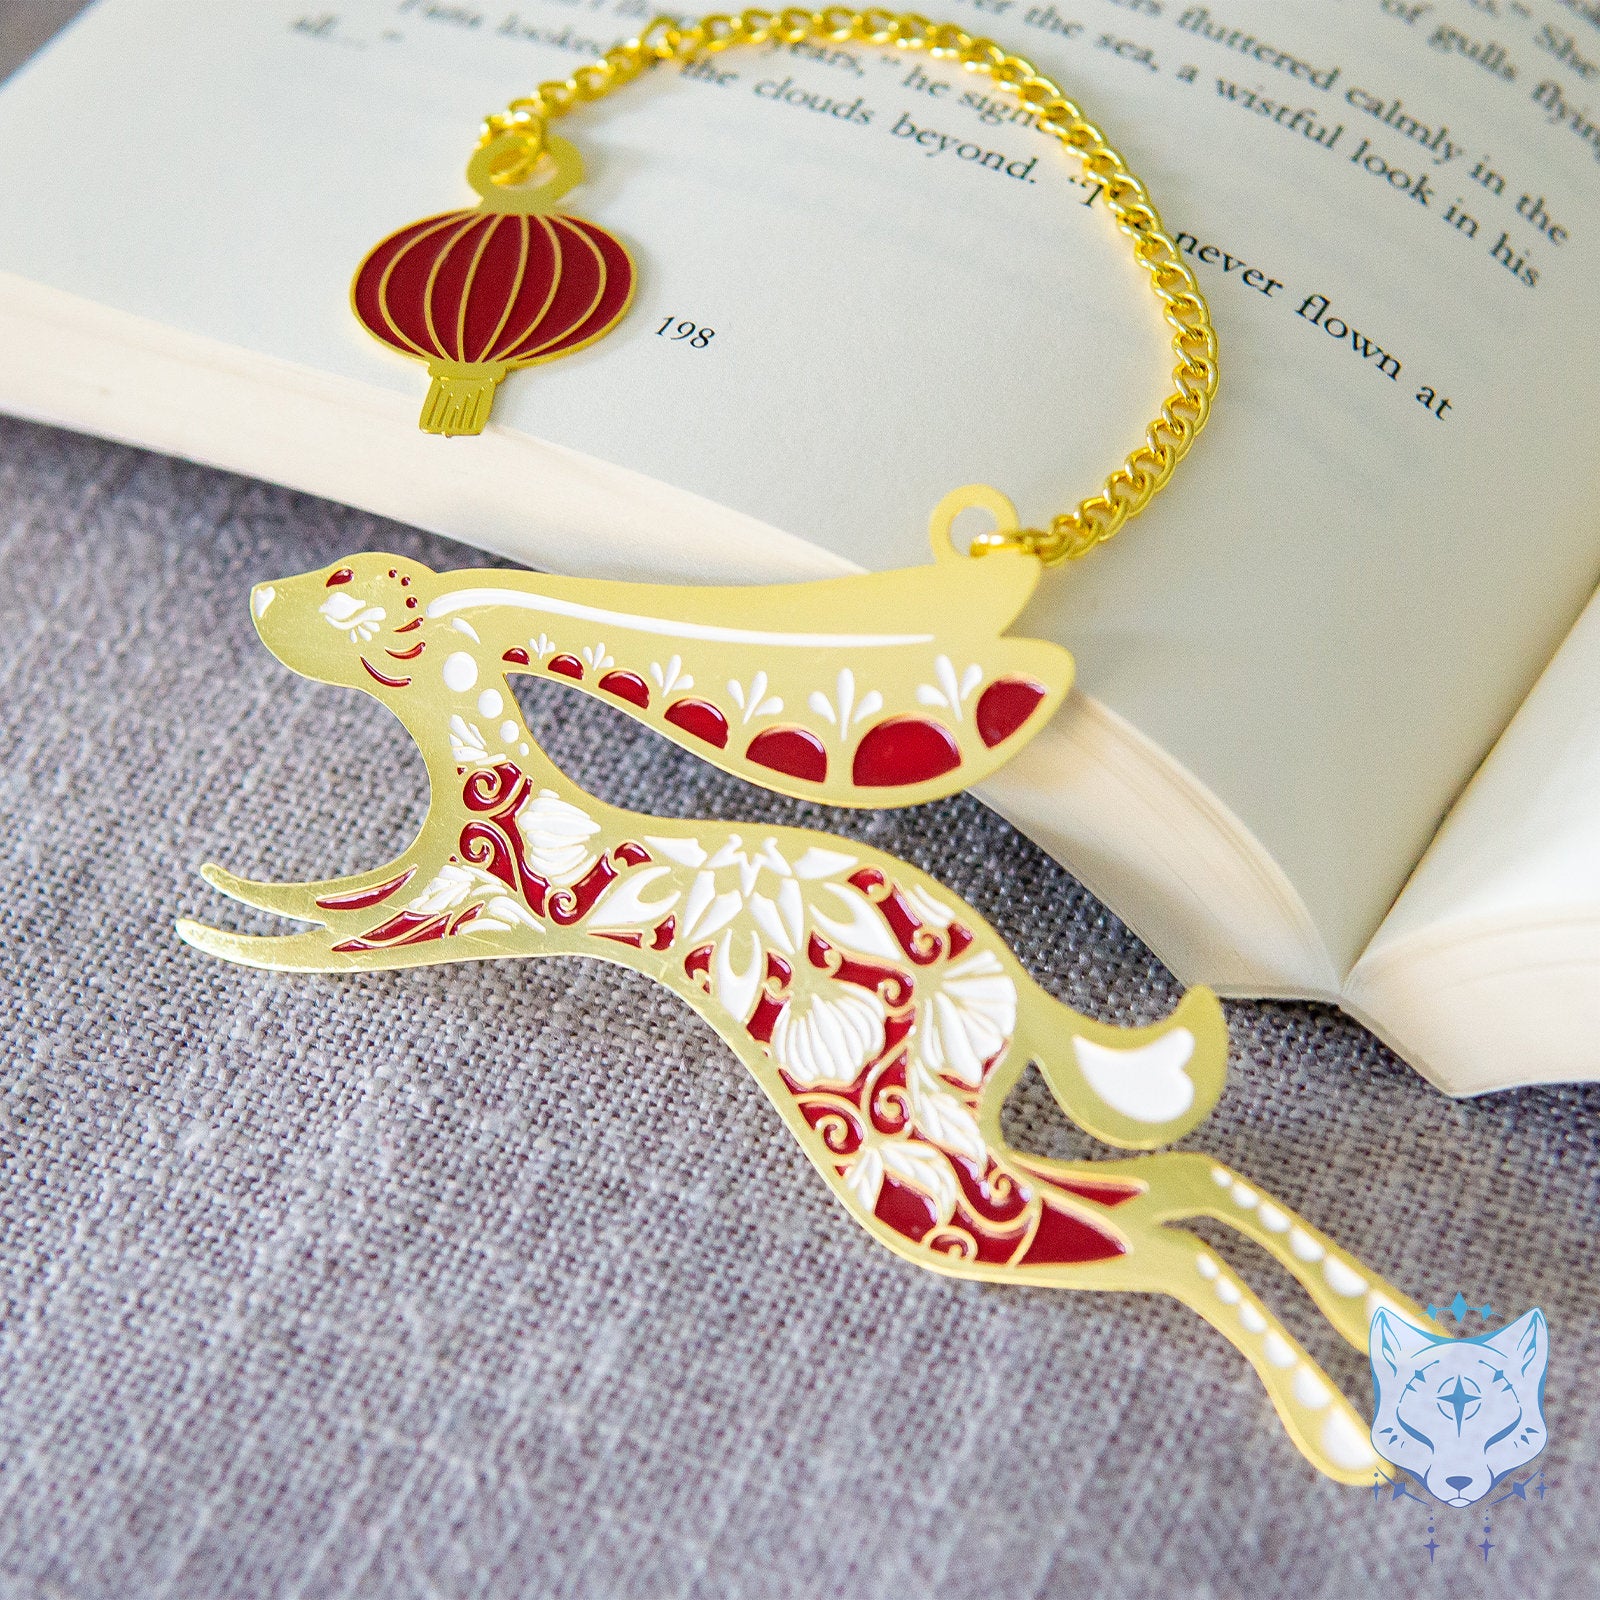 Floral Year of the Rabbit Metal Bookmark - LIMITED EDITION 3.75 inch Metal Bookmark, Book Accessories, Book Lovers Gift